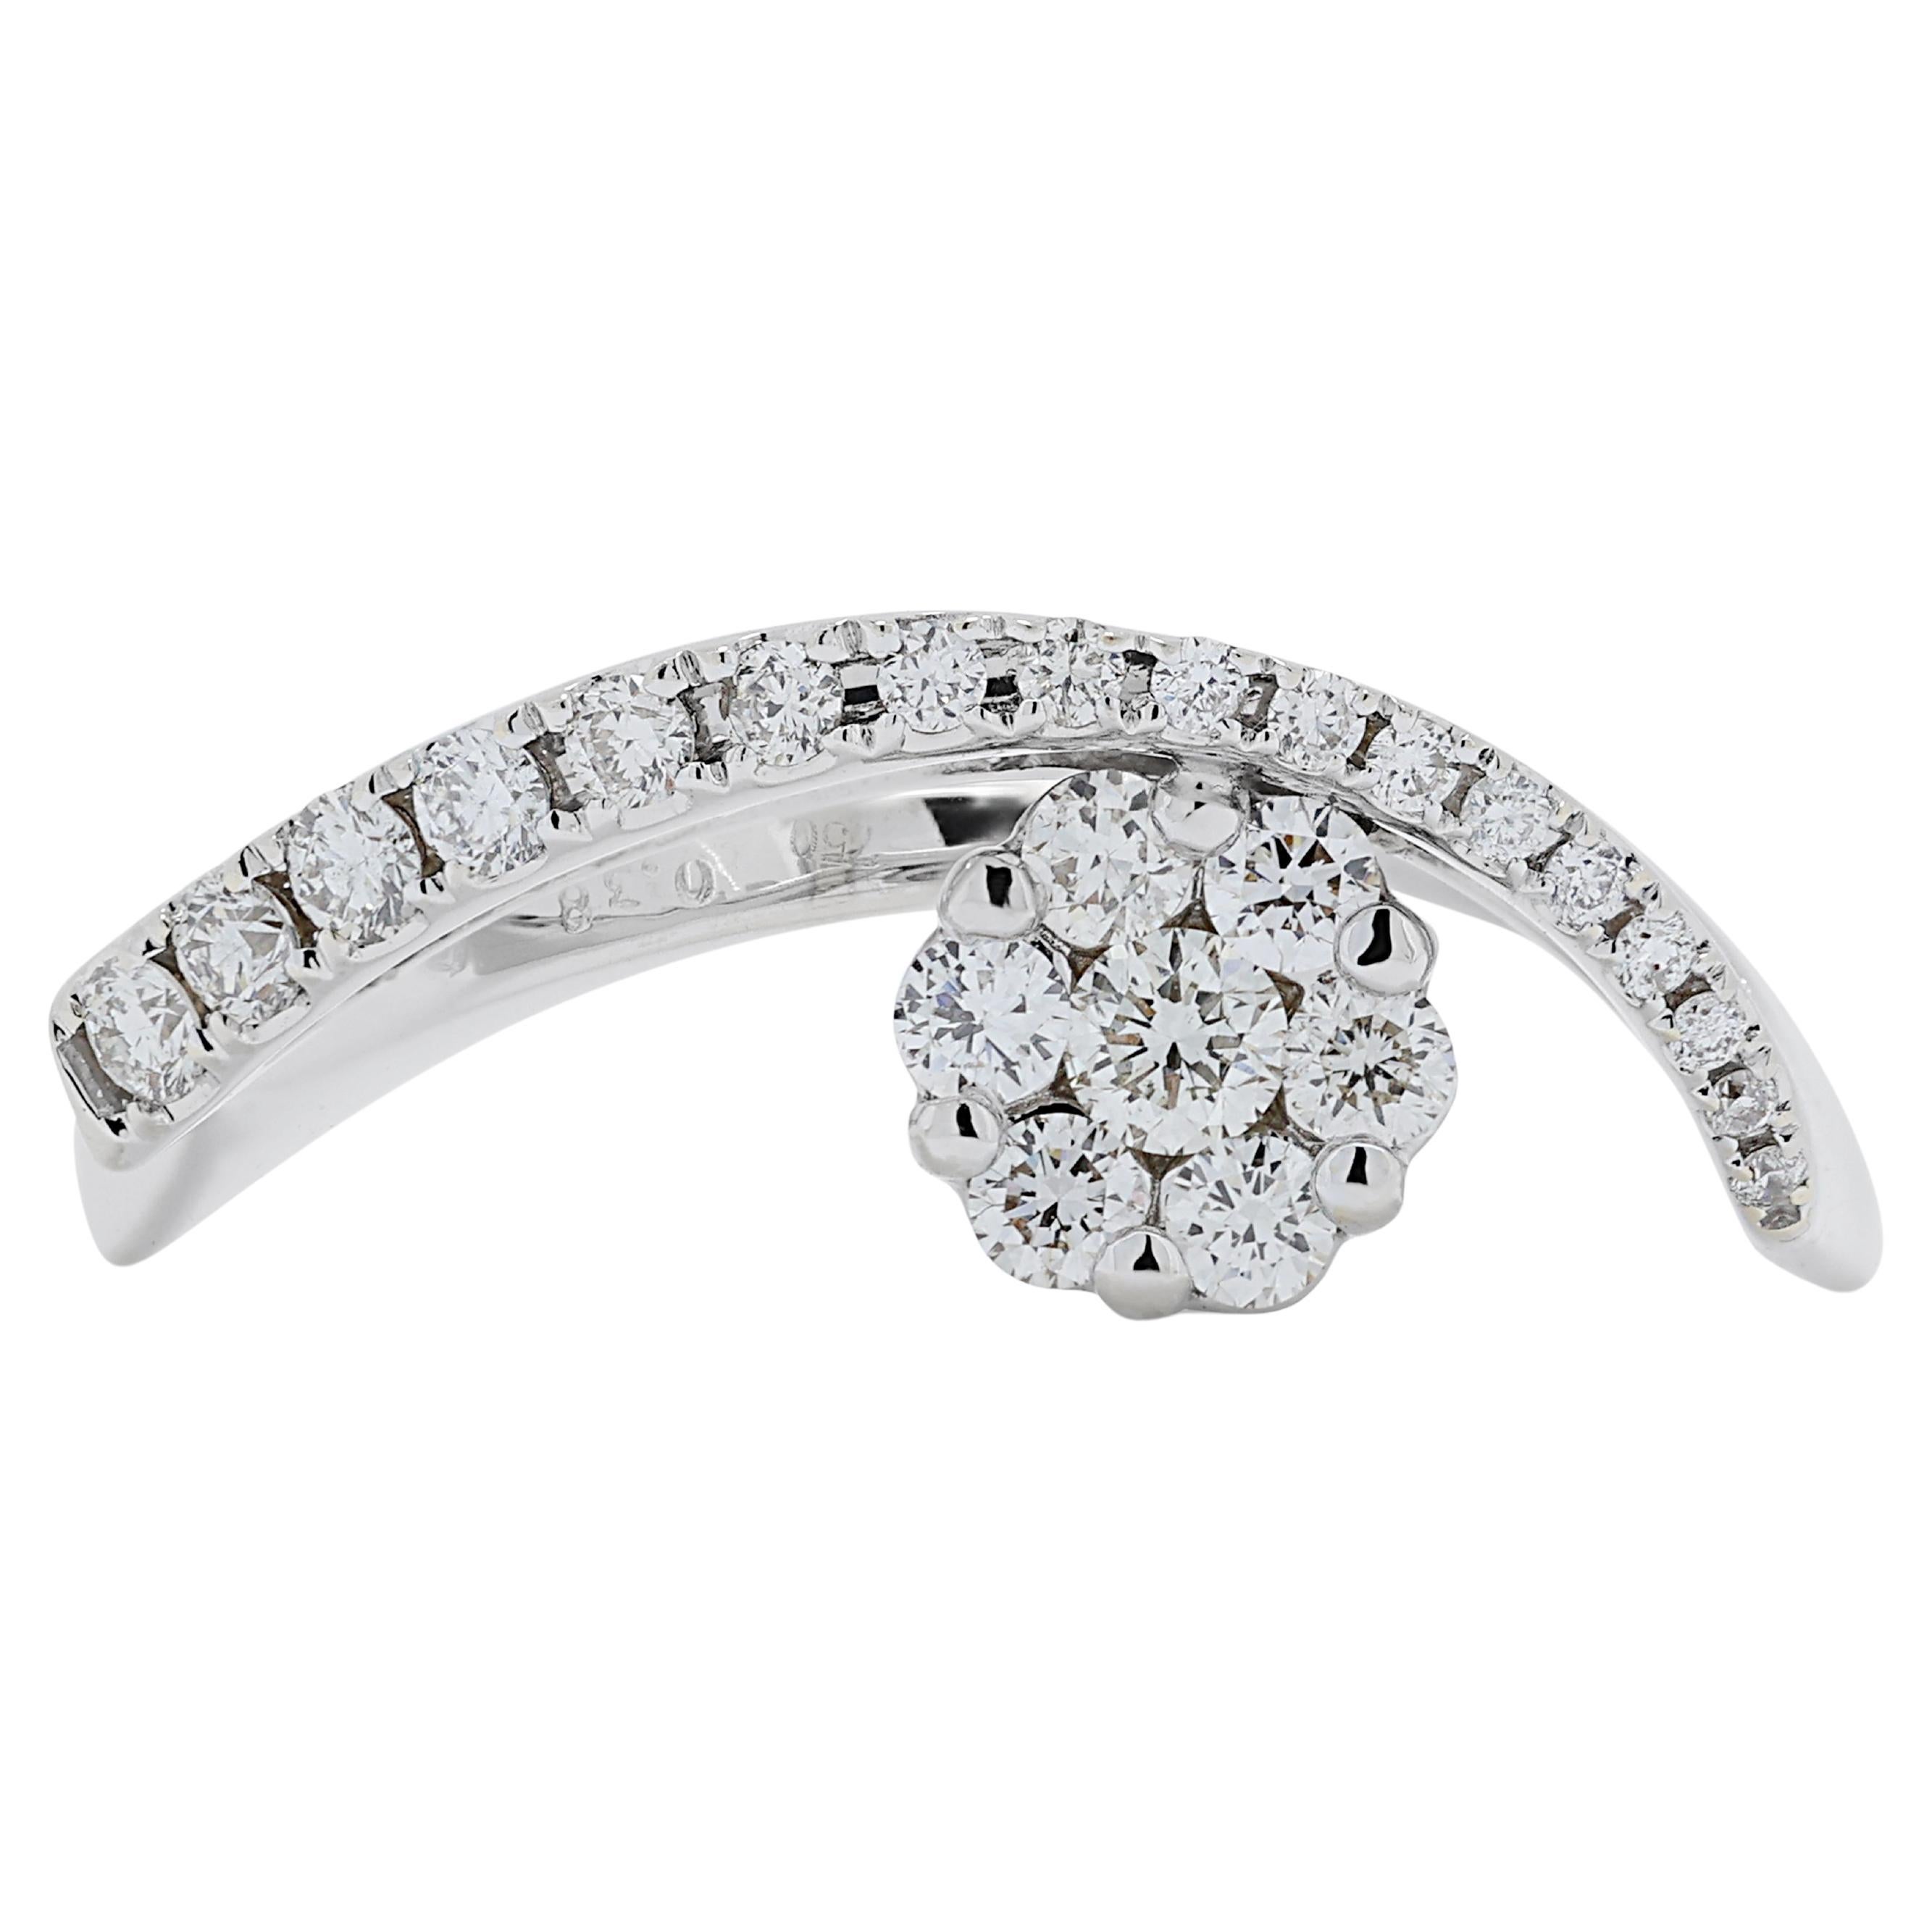 Stylish 0.85ct Diamonds Ring in 18K White Gold For Sale